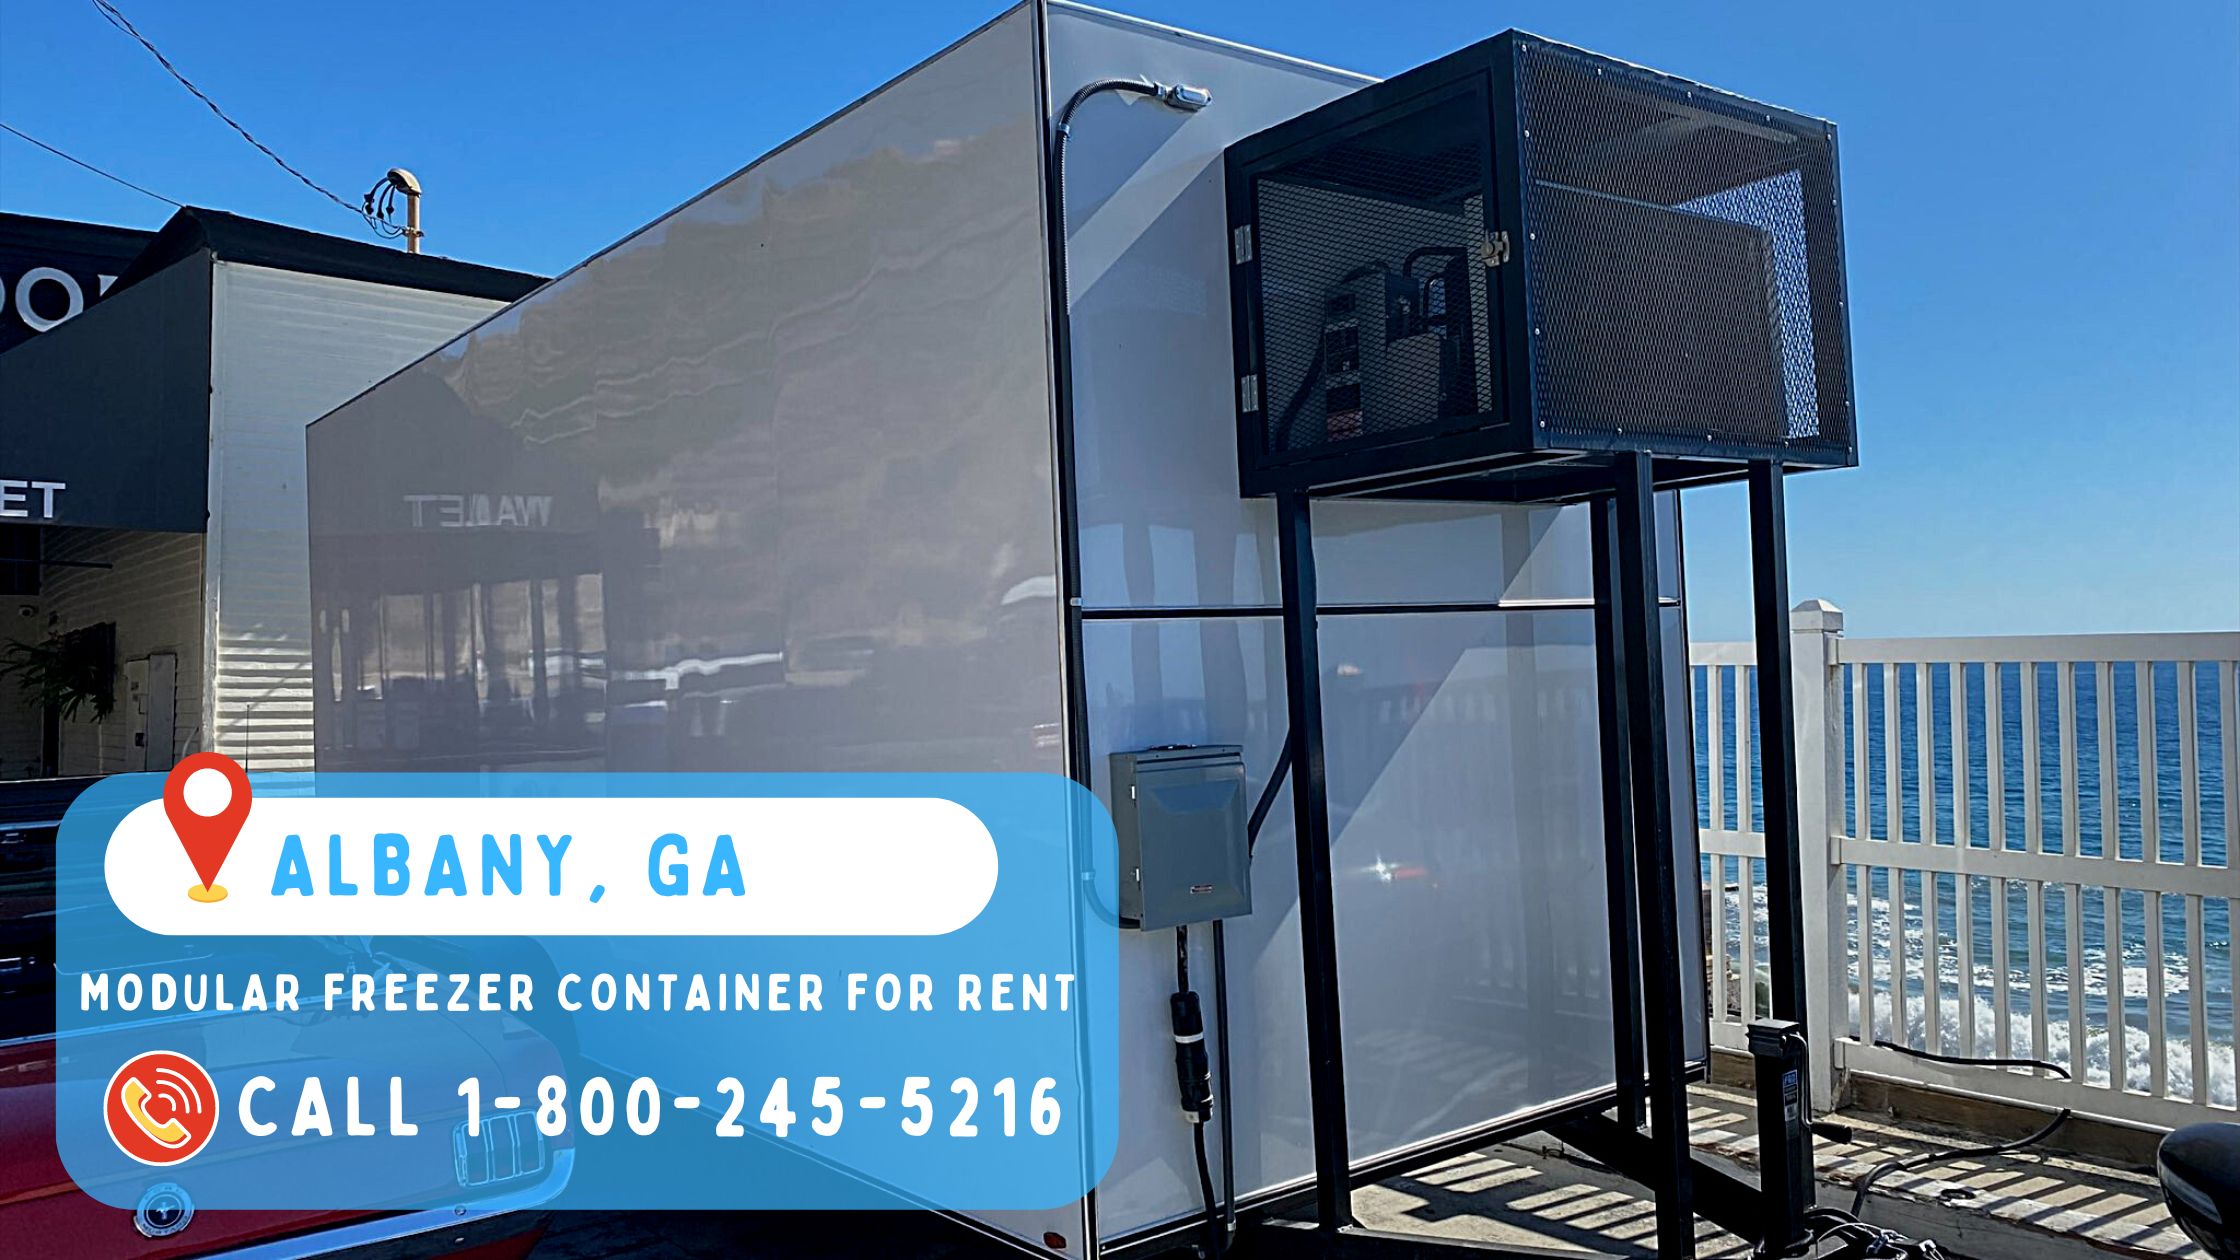 Modular freezer container for rent in Albany